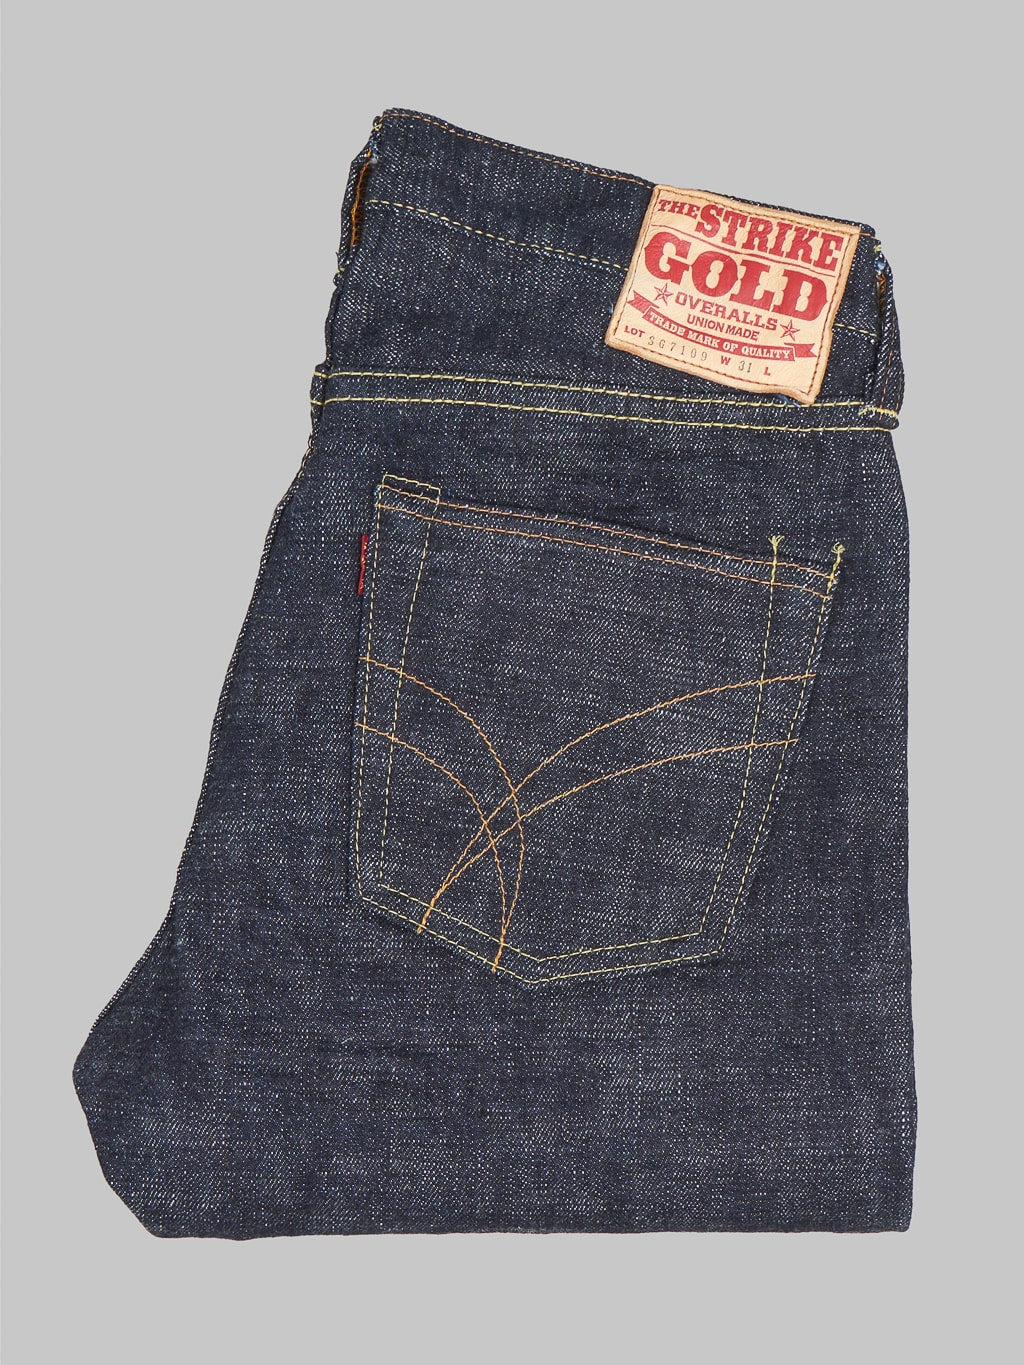 The Strike Gold 7109 Ultra Slubby Slim Tapered Jeans cotton fabric